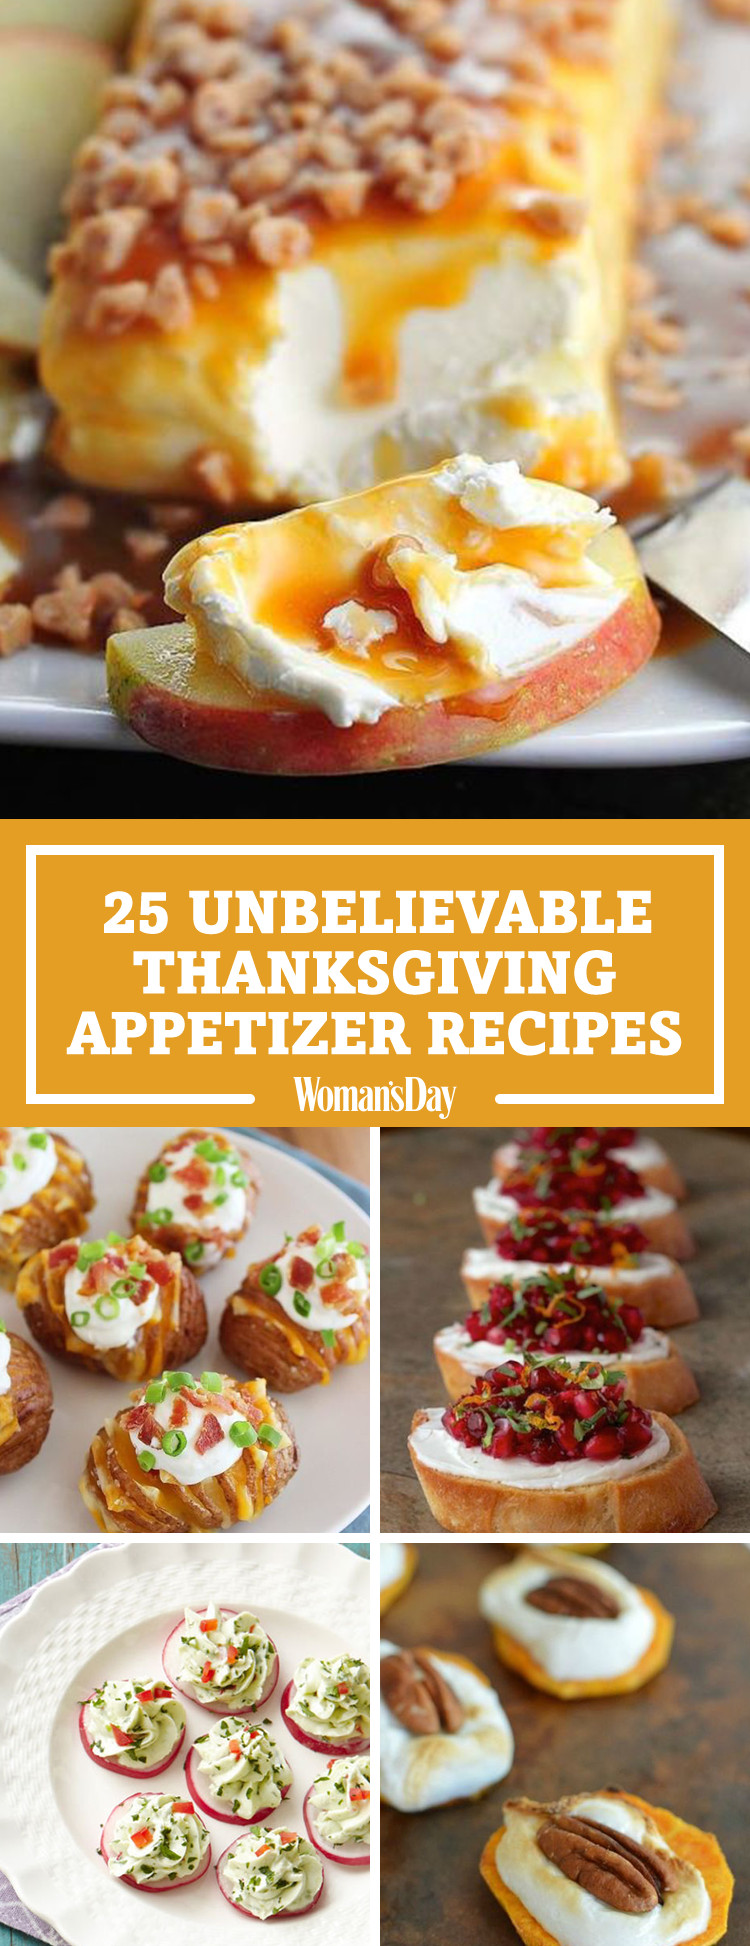 Thanksgiving Appetizers Pinterest
 34 Easy Thanksgiving Appetizers Best Recipes for